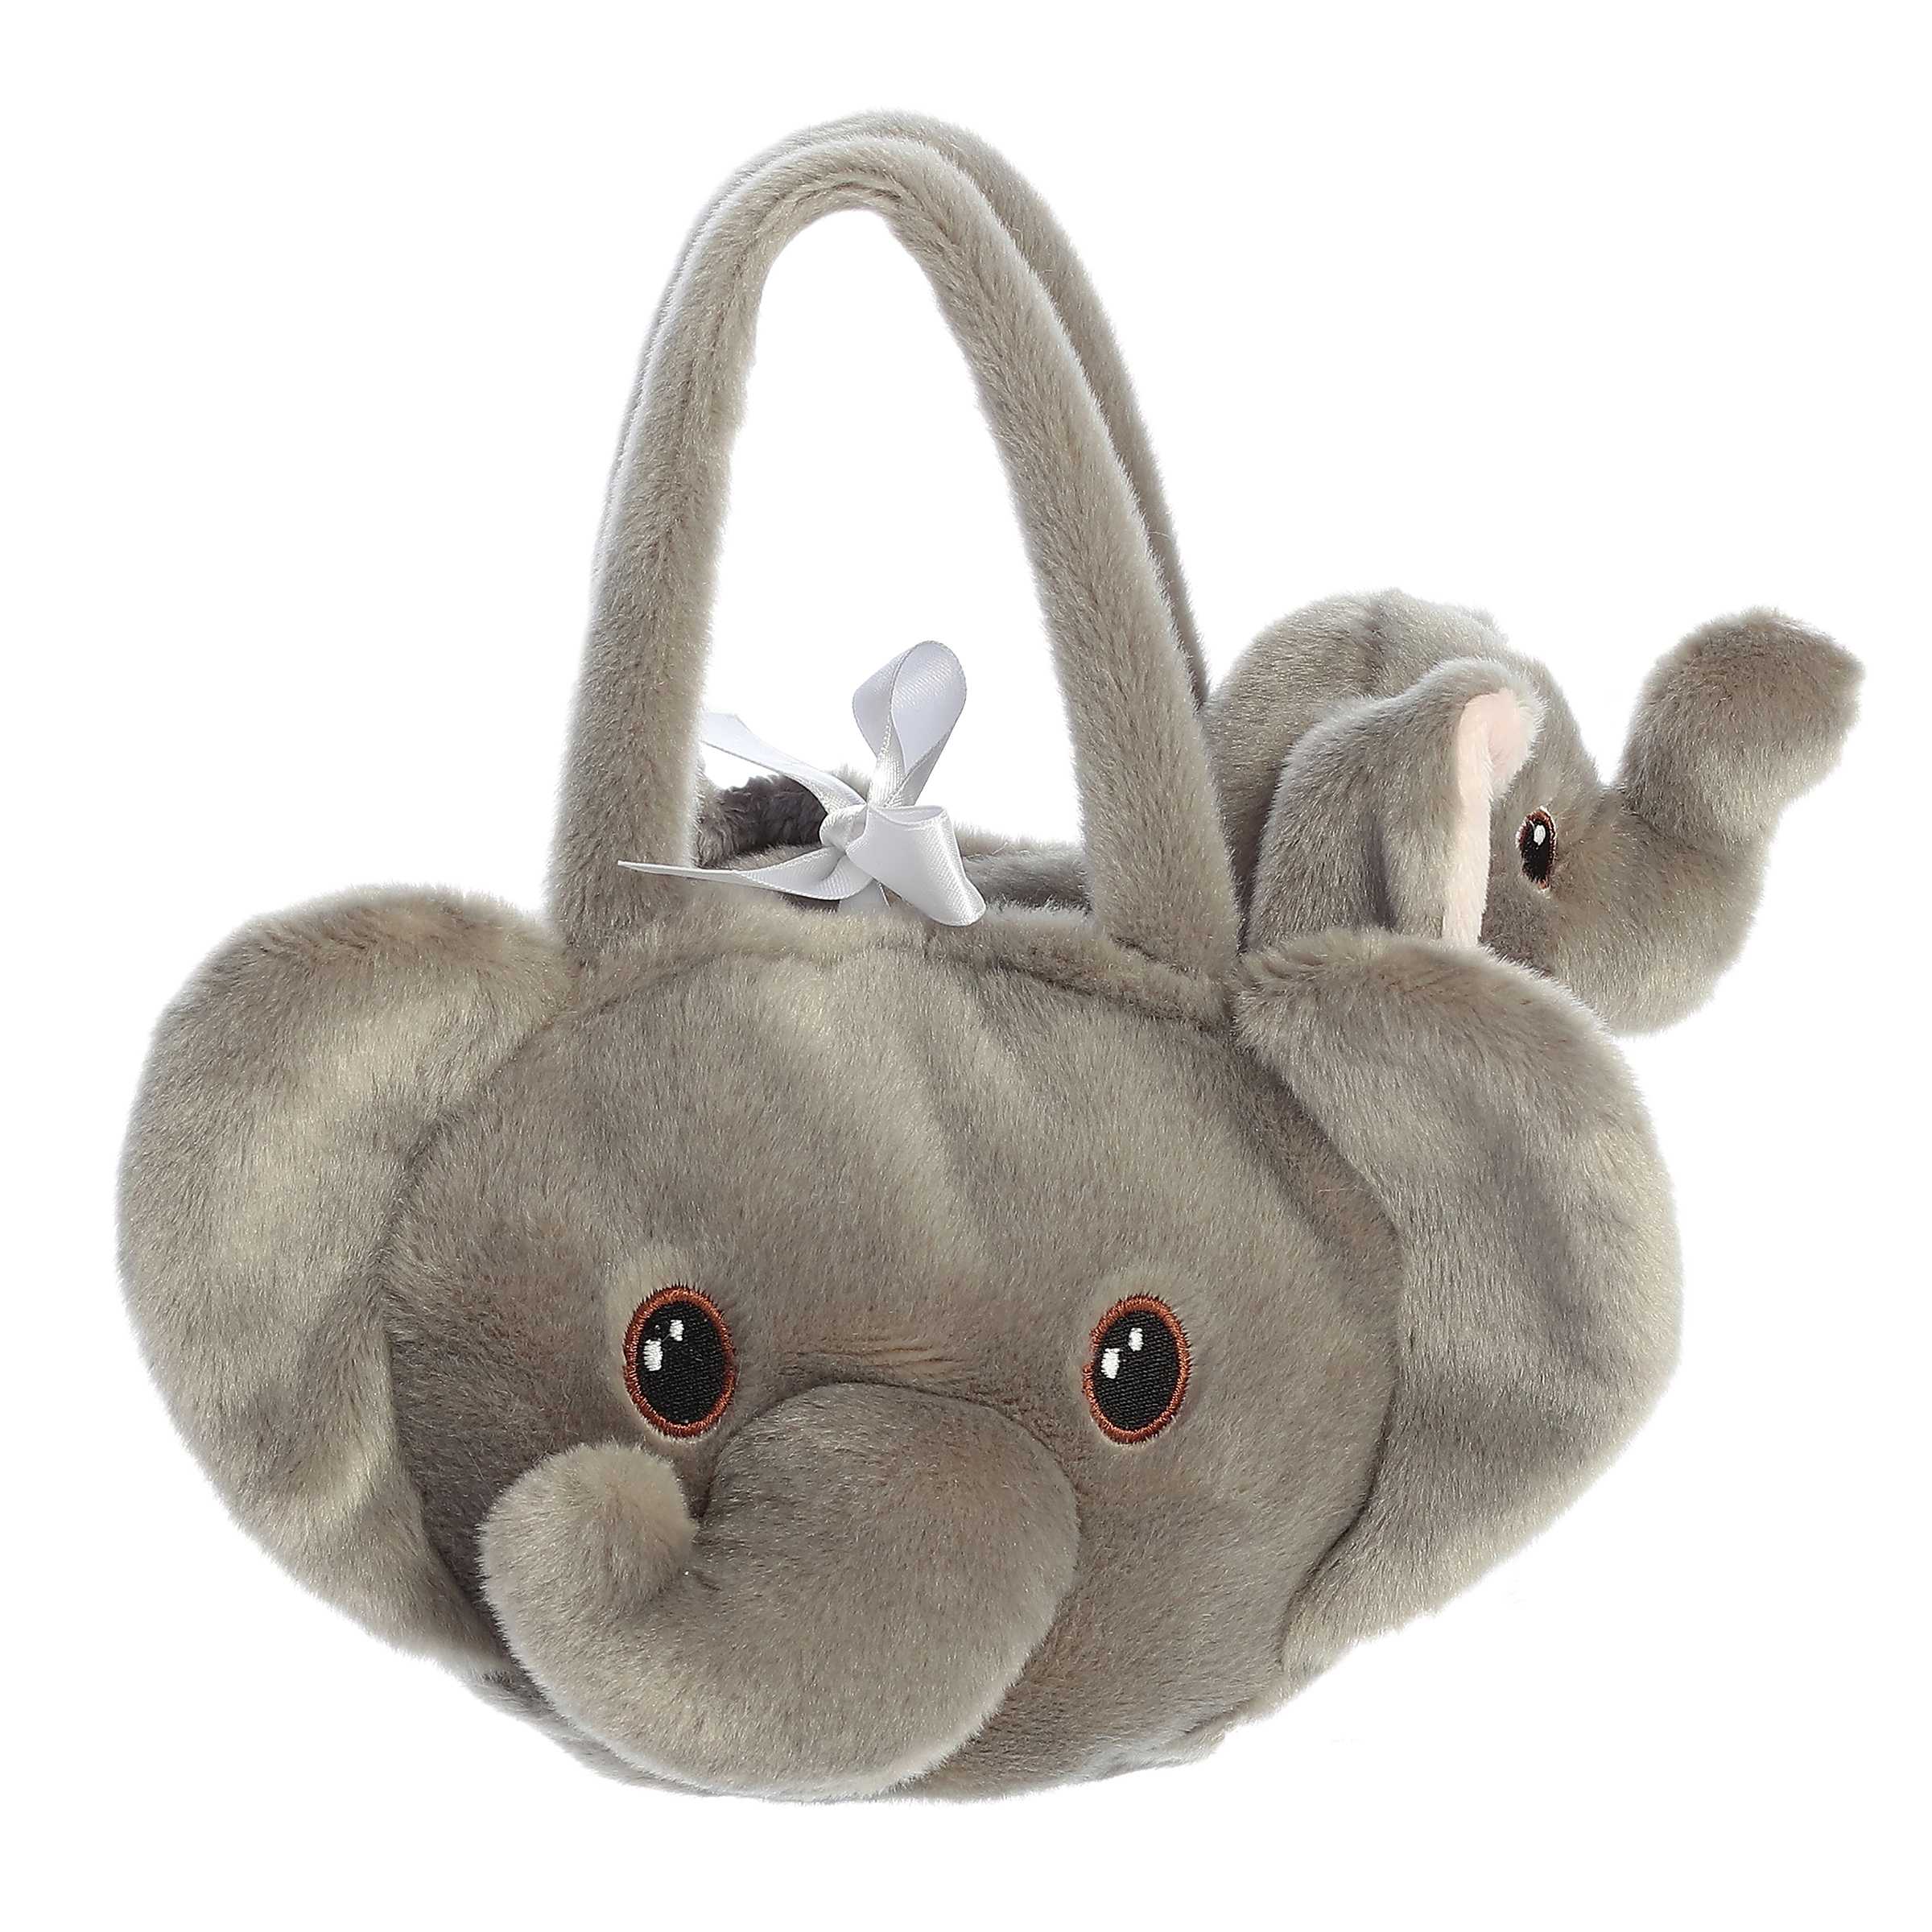 Eco Nation Baby Elephant Plush by Aurora stuffed animals in a plush carrier, made from recycled materials.